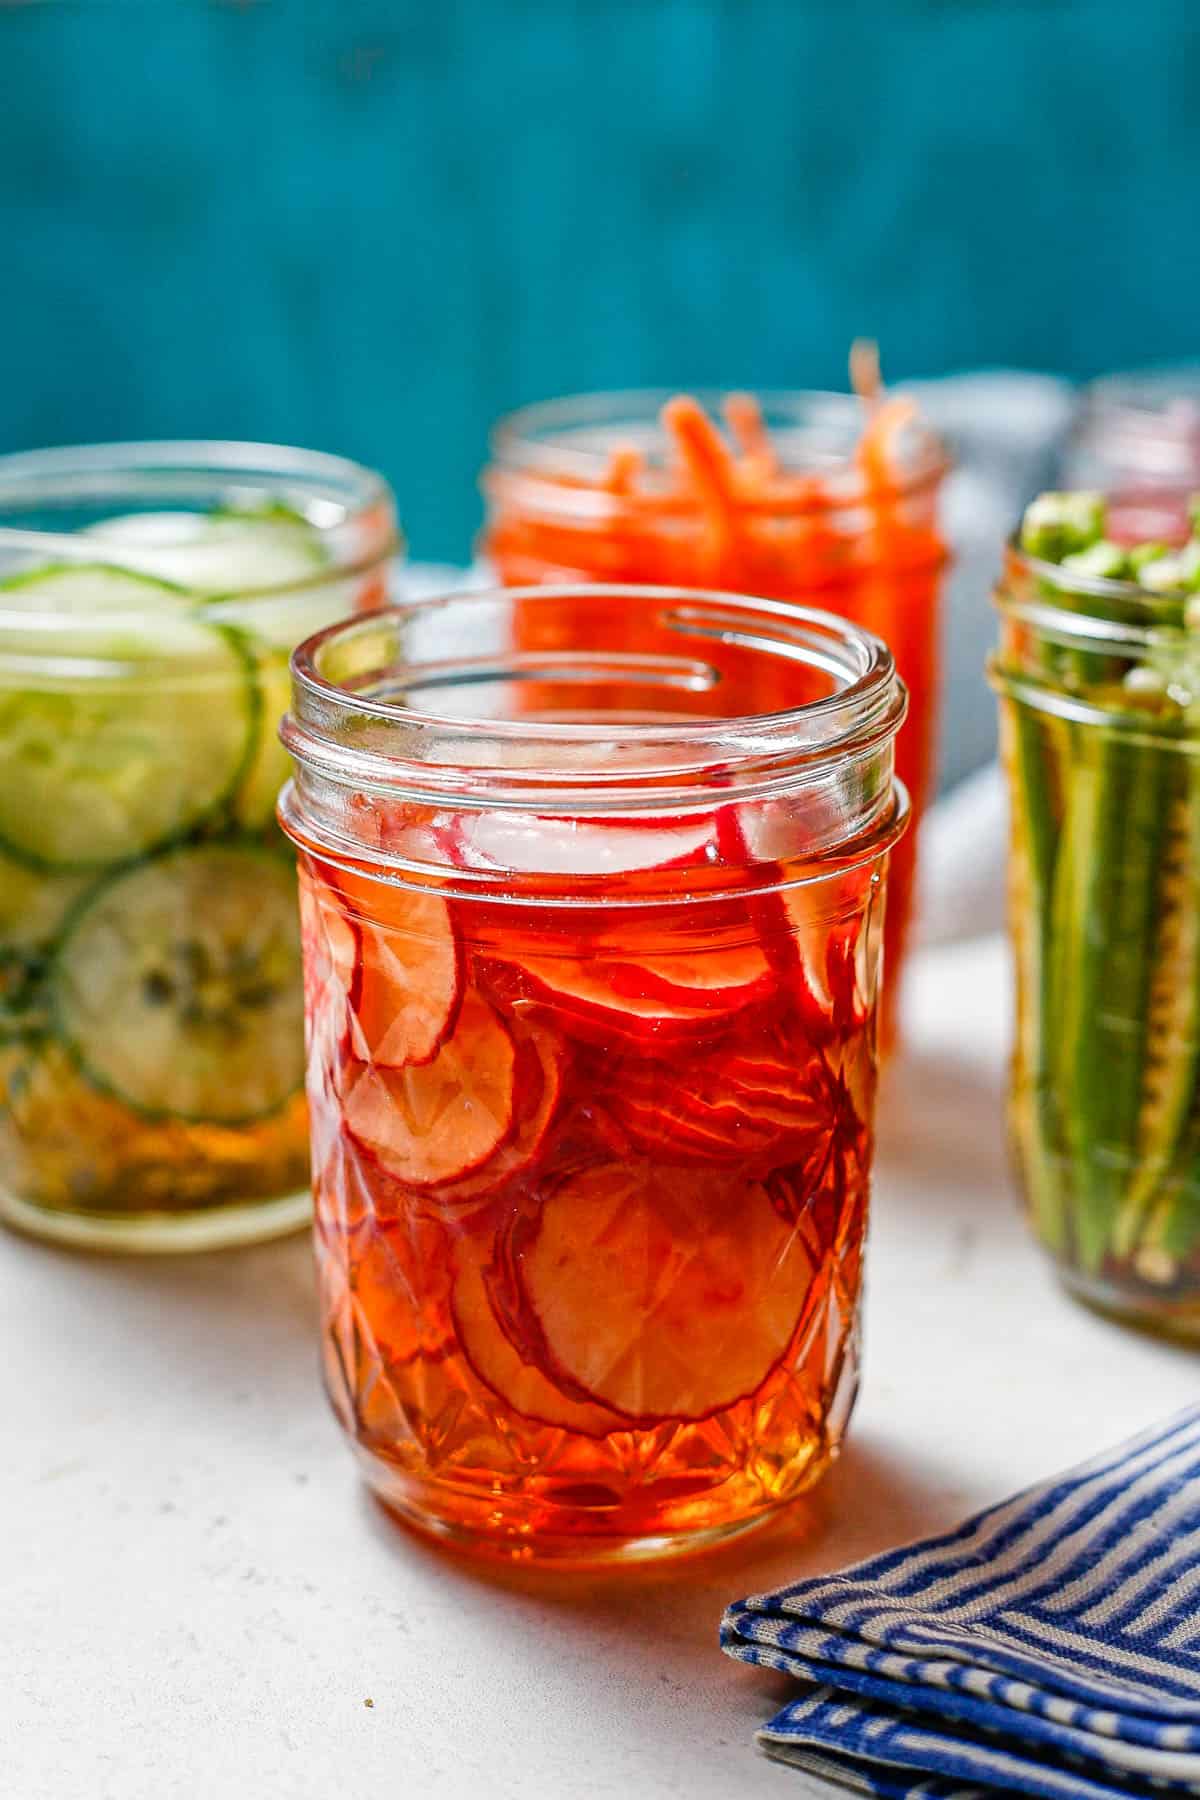 Sliced pickled radishes in a small glass jar with other pickled veggies in the background.